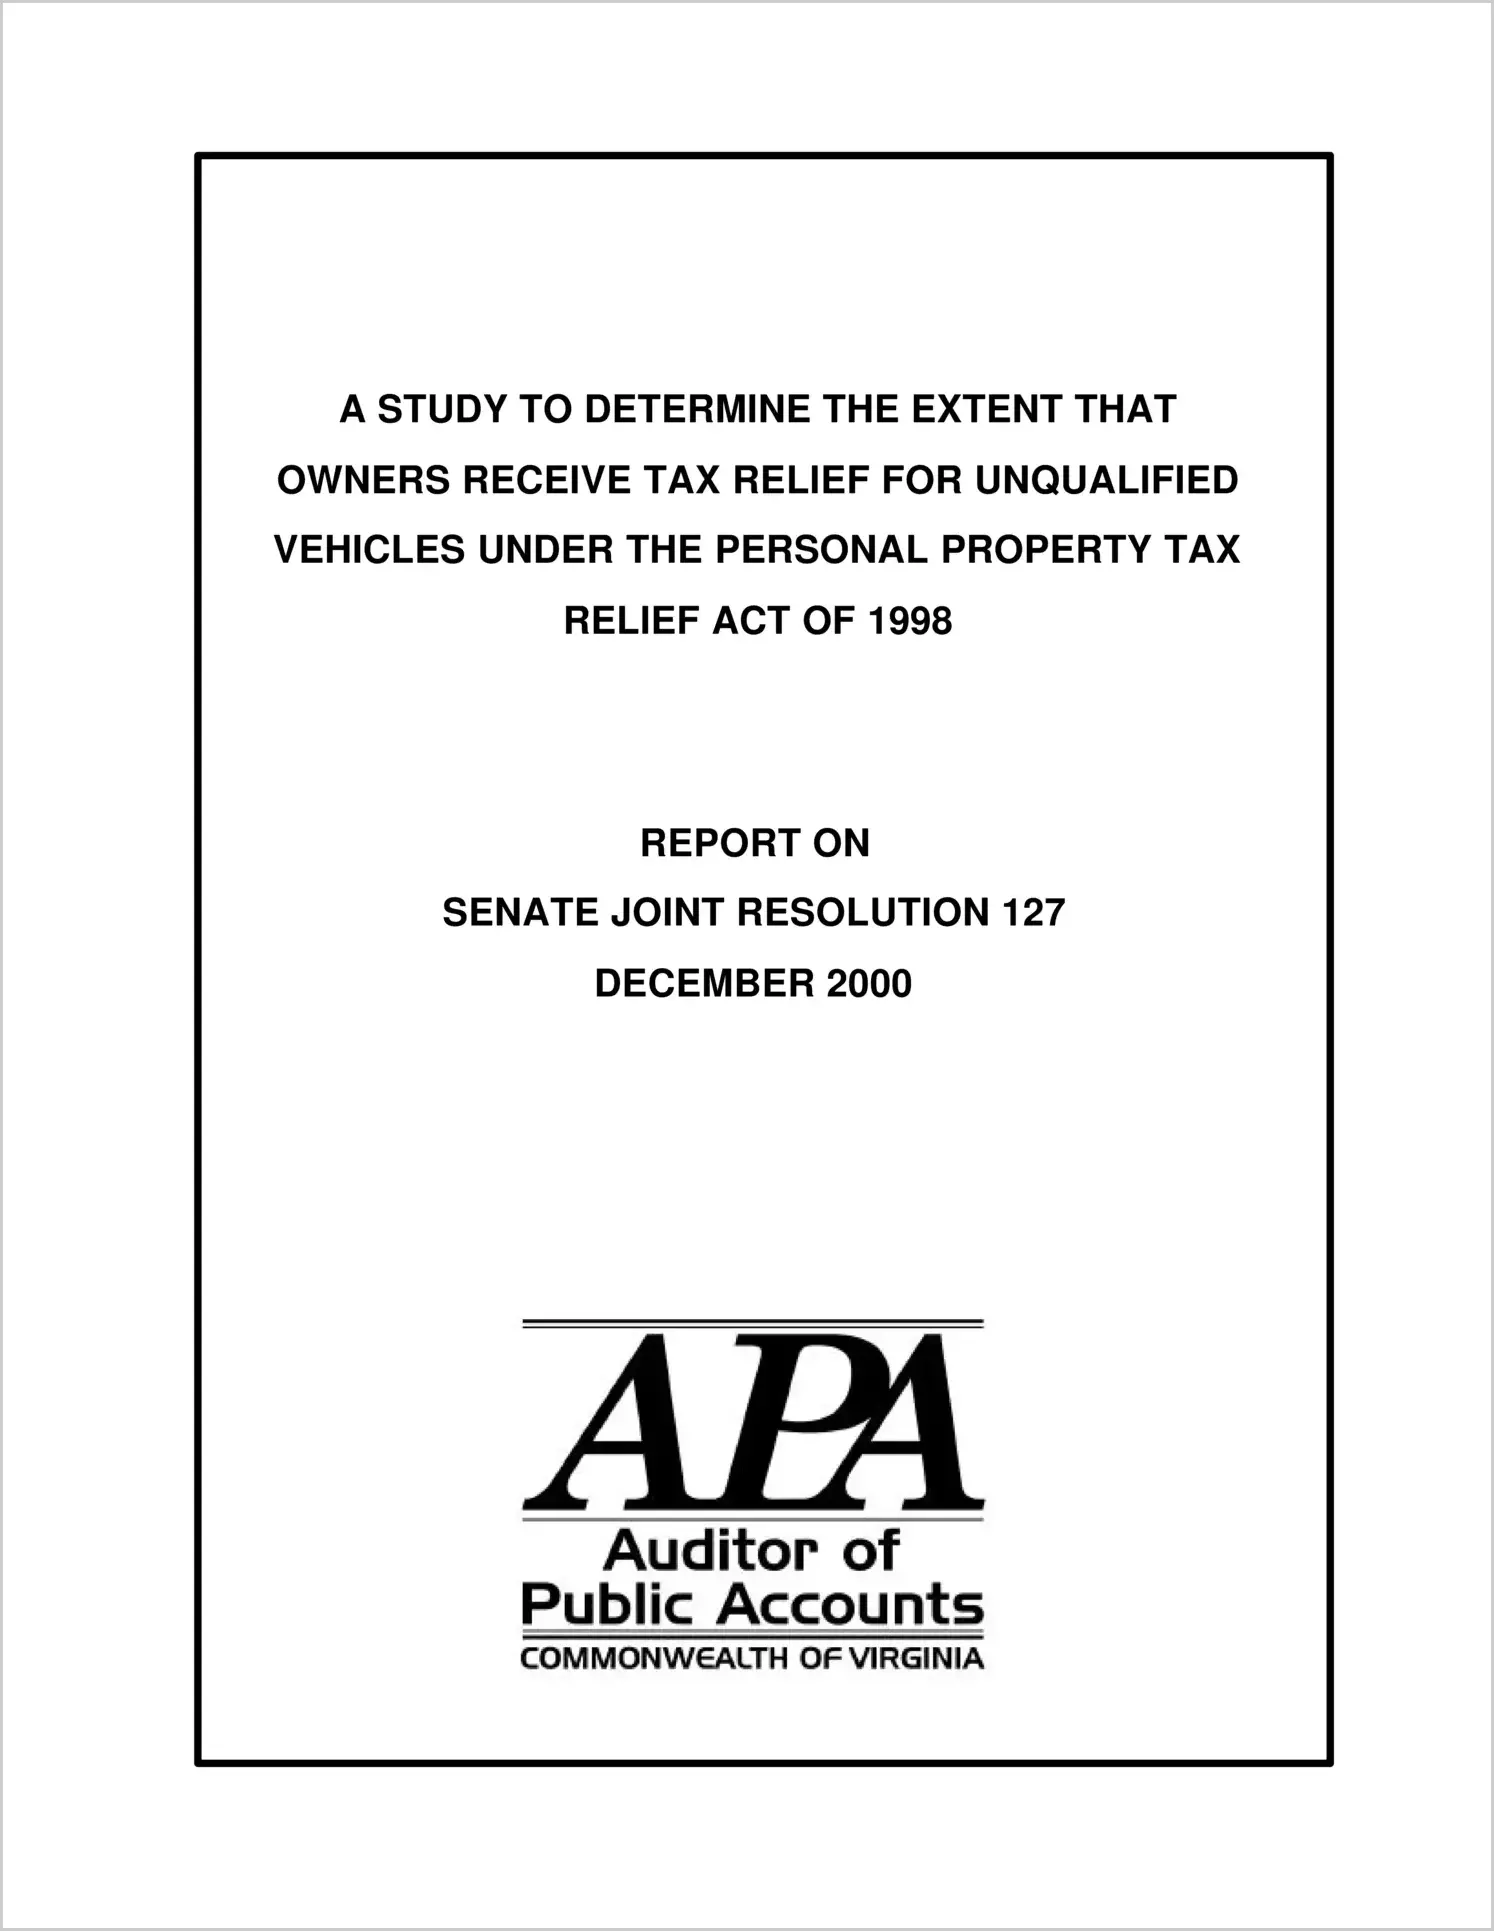 Special ReportA Study to Determine the Extent that Owners Receive Tax Relief for Unqualified Vehicles Under the Personal Property Tax Relief Act of 1998(Report Date: 12/1/2000)